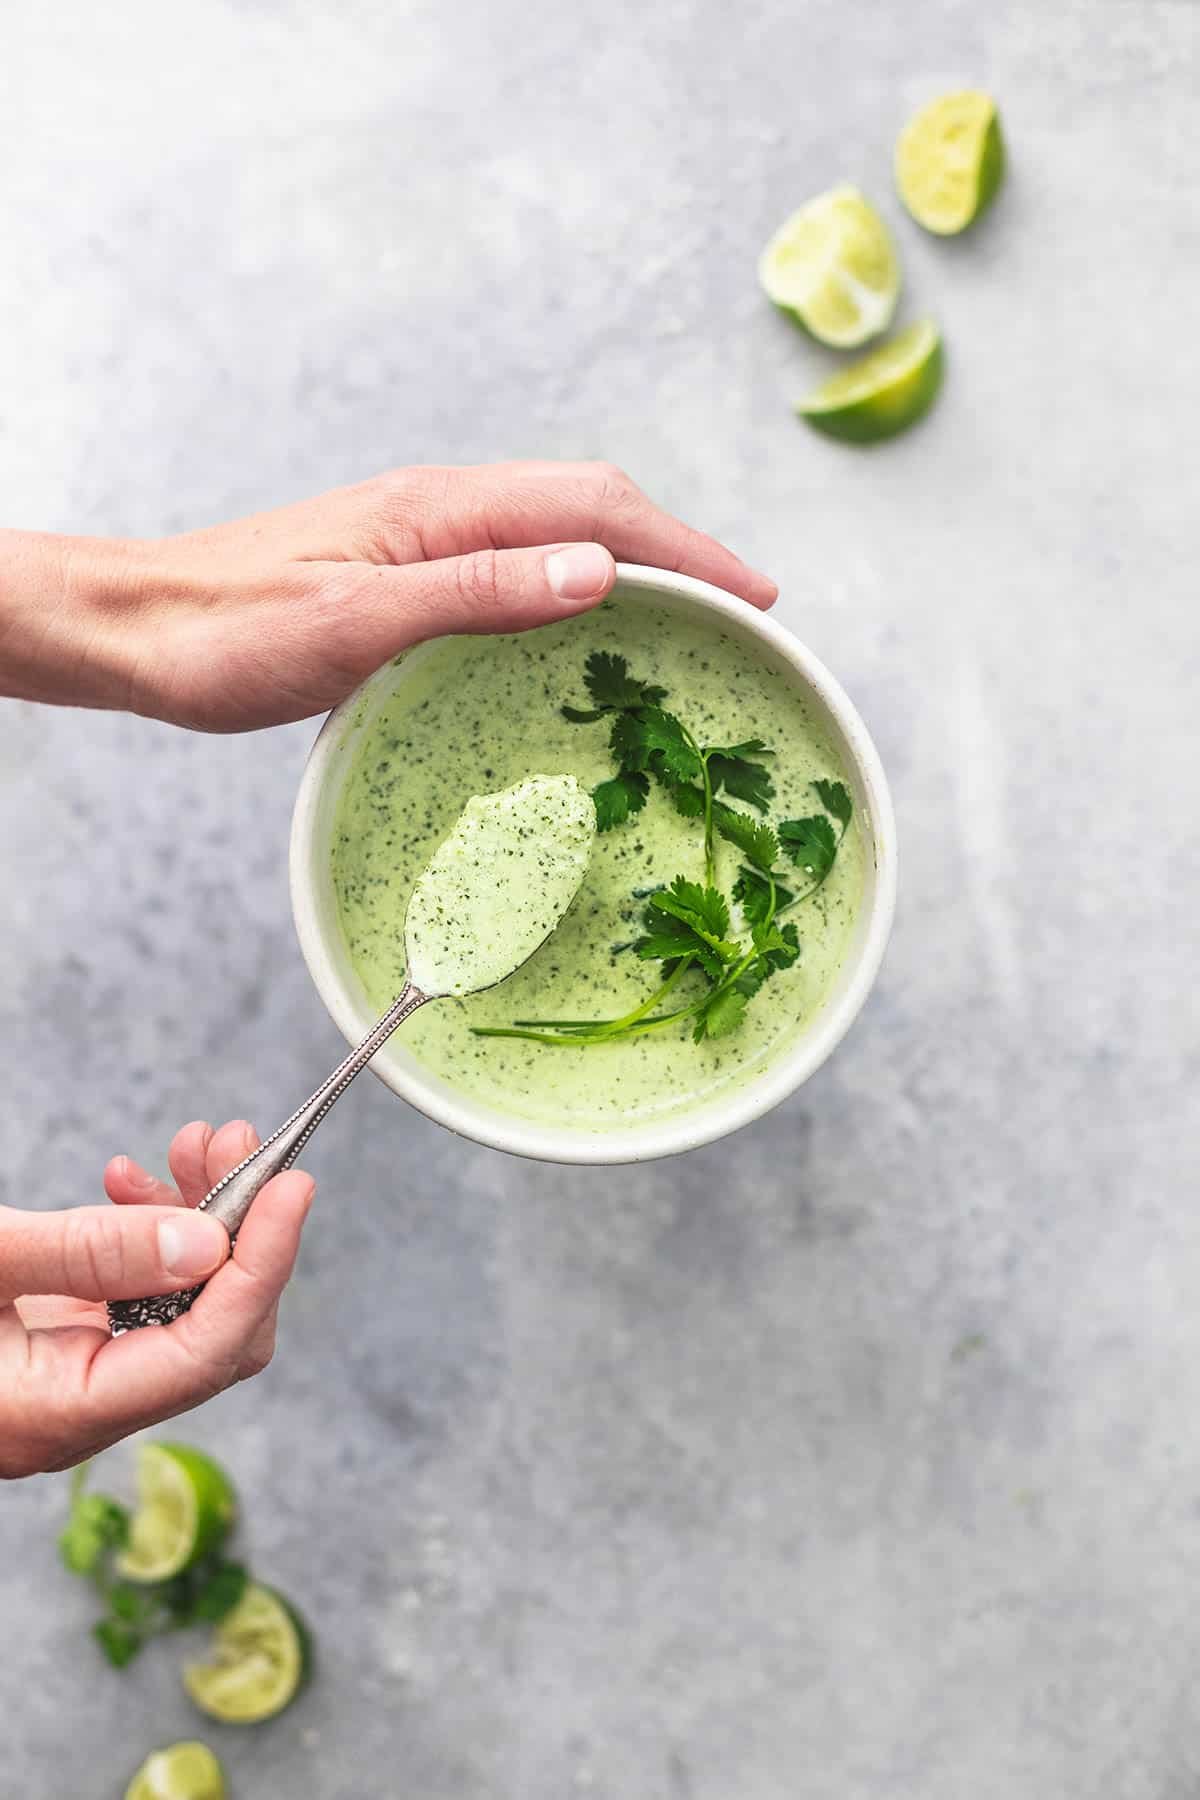 top view of a hand holding the side of a bowl and another holding up a spoon from the bowl with cilantro lime sauce.